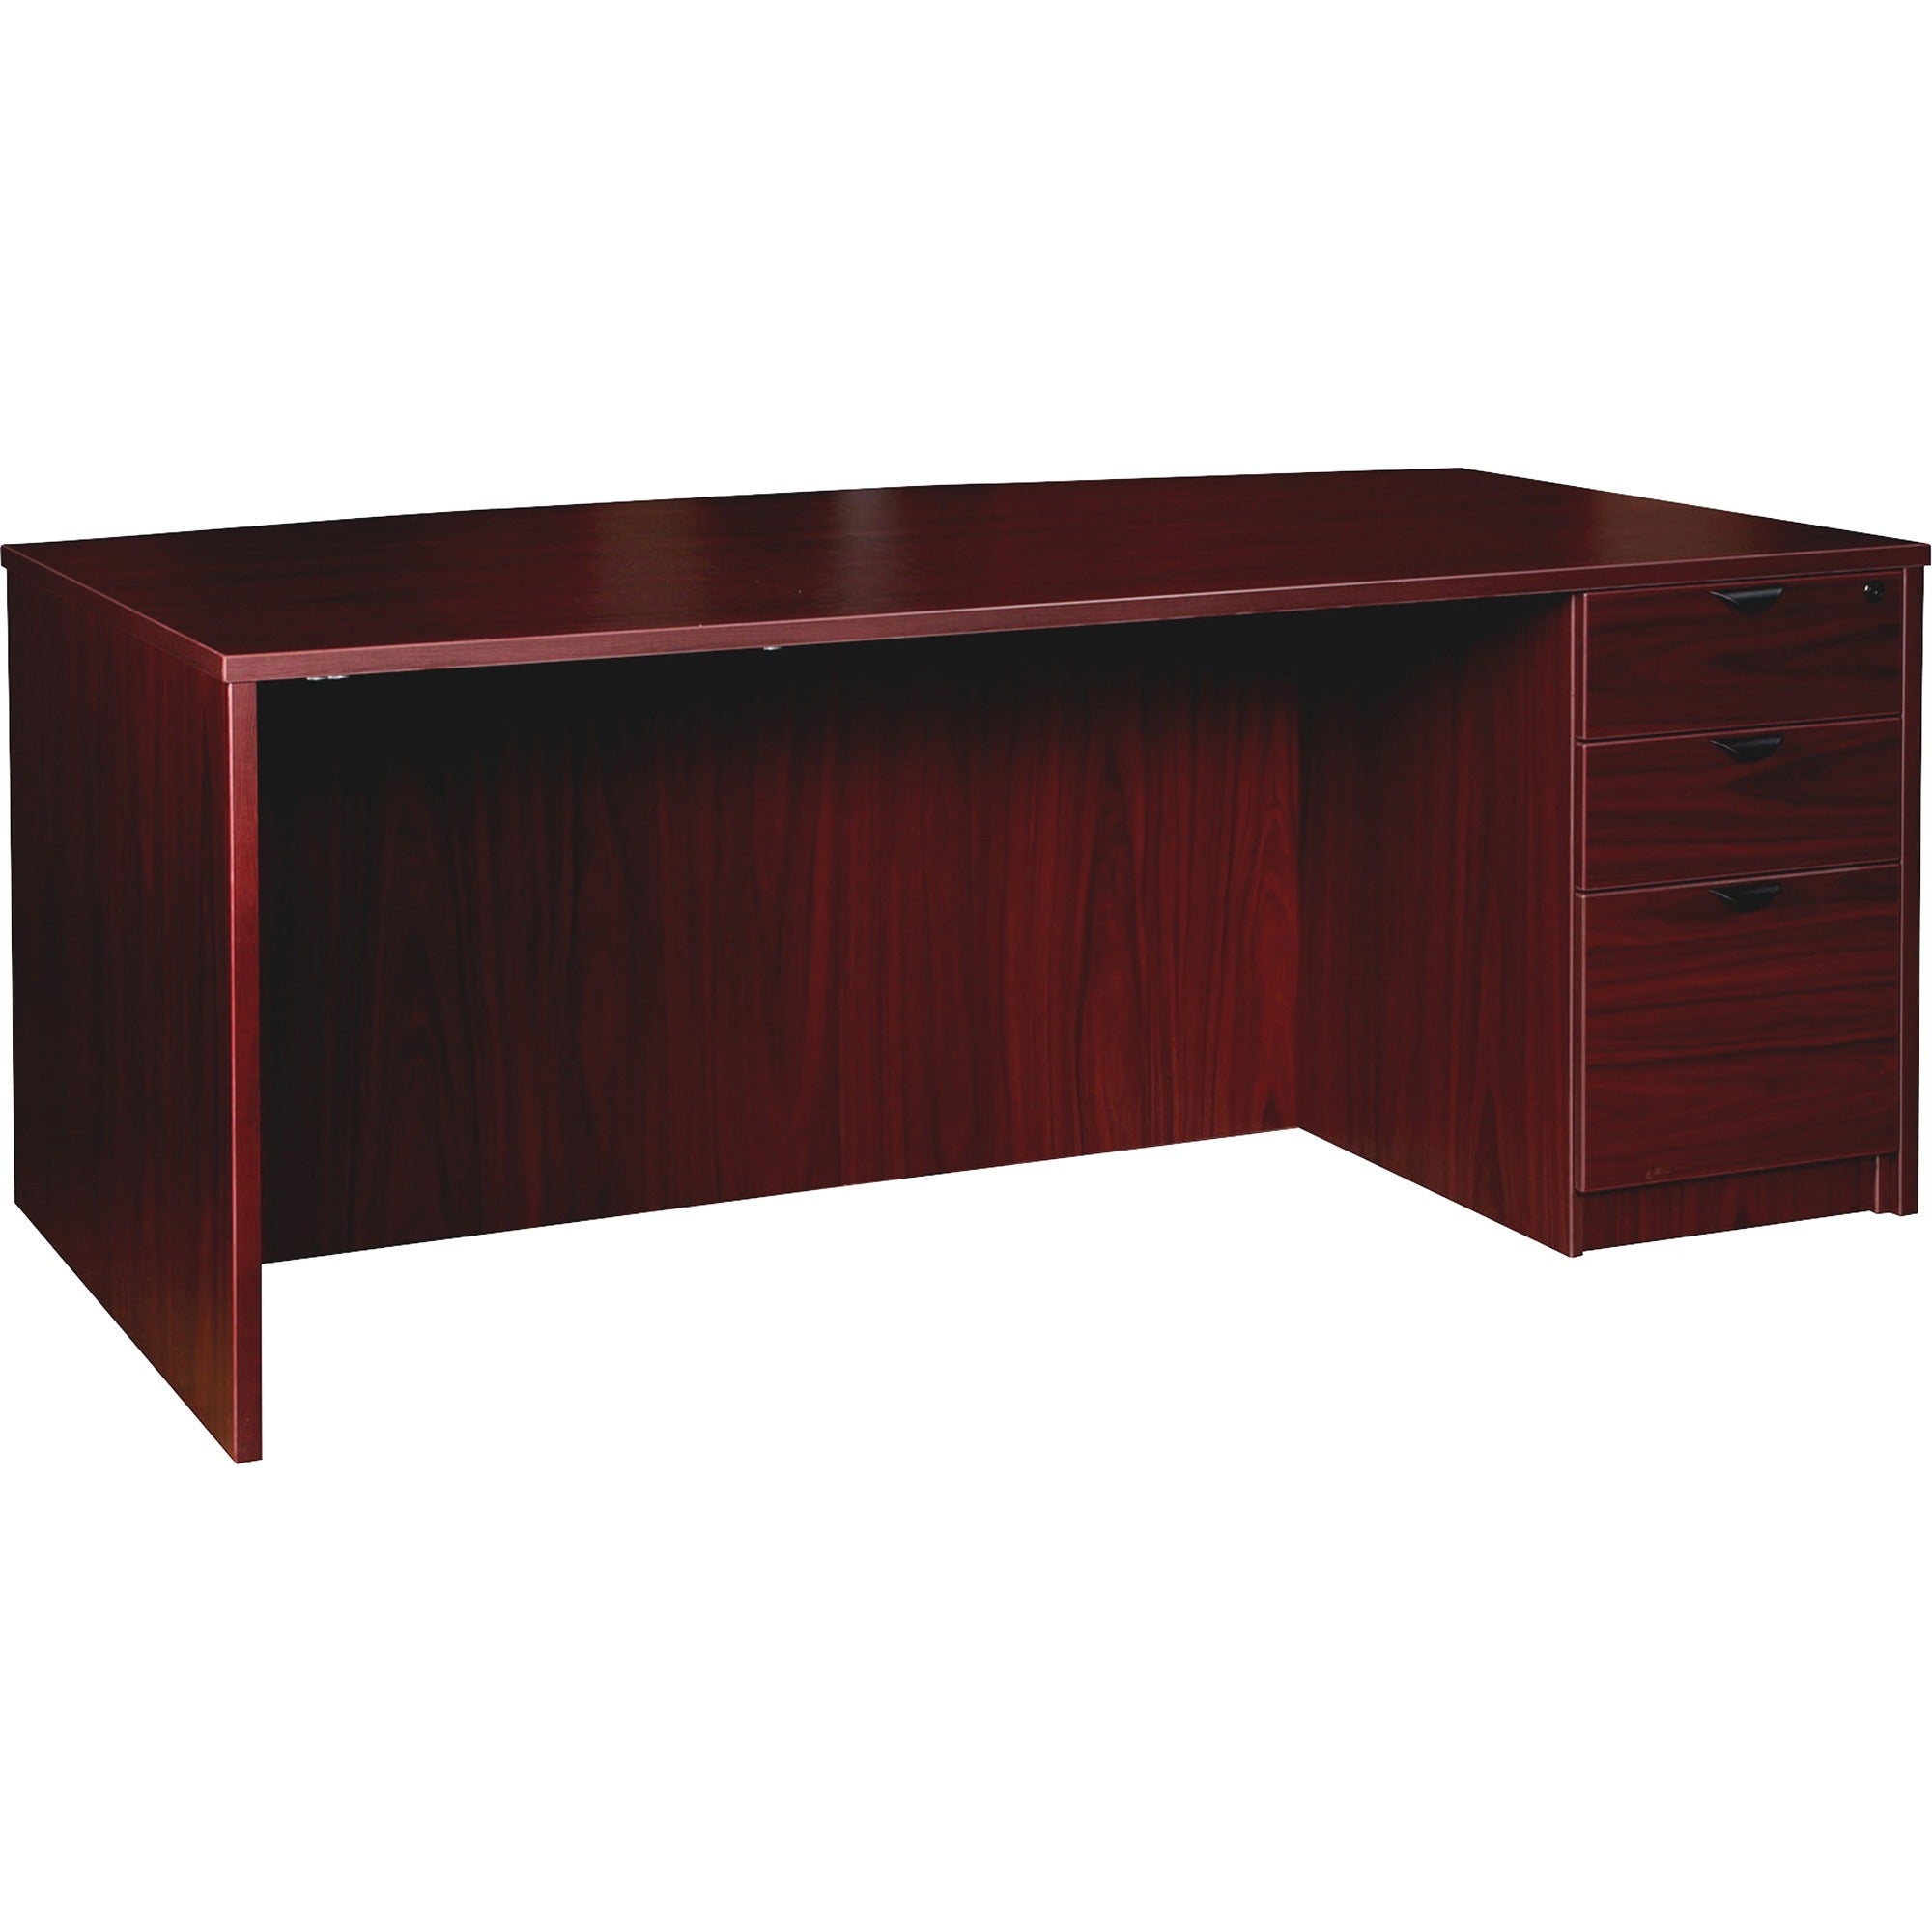 lorell-prominence-20-bowfront-right-pedestal-desk-1-top-72-x-4229-3-x-file-box-drawers-single-pedestal-on-right-side-band-edge-material-particleboard-finish-mahogany-laminate-thermofused-melamine-tfm_llrpd4272rspmy - 1